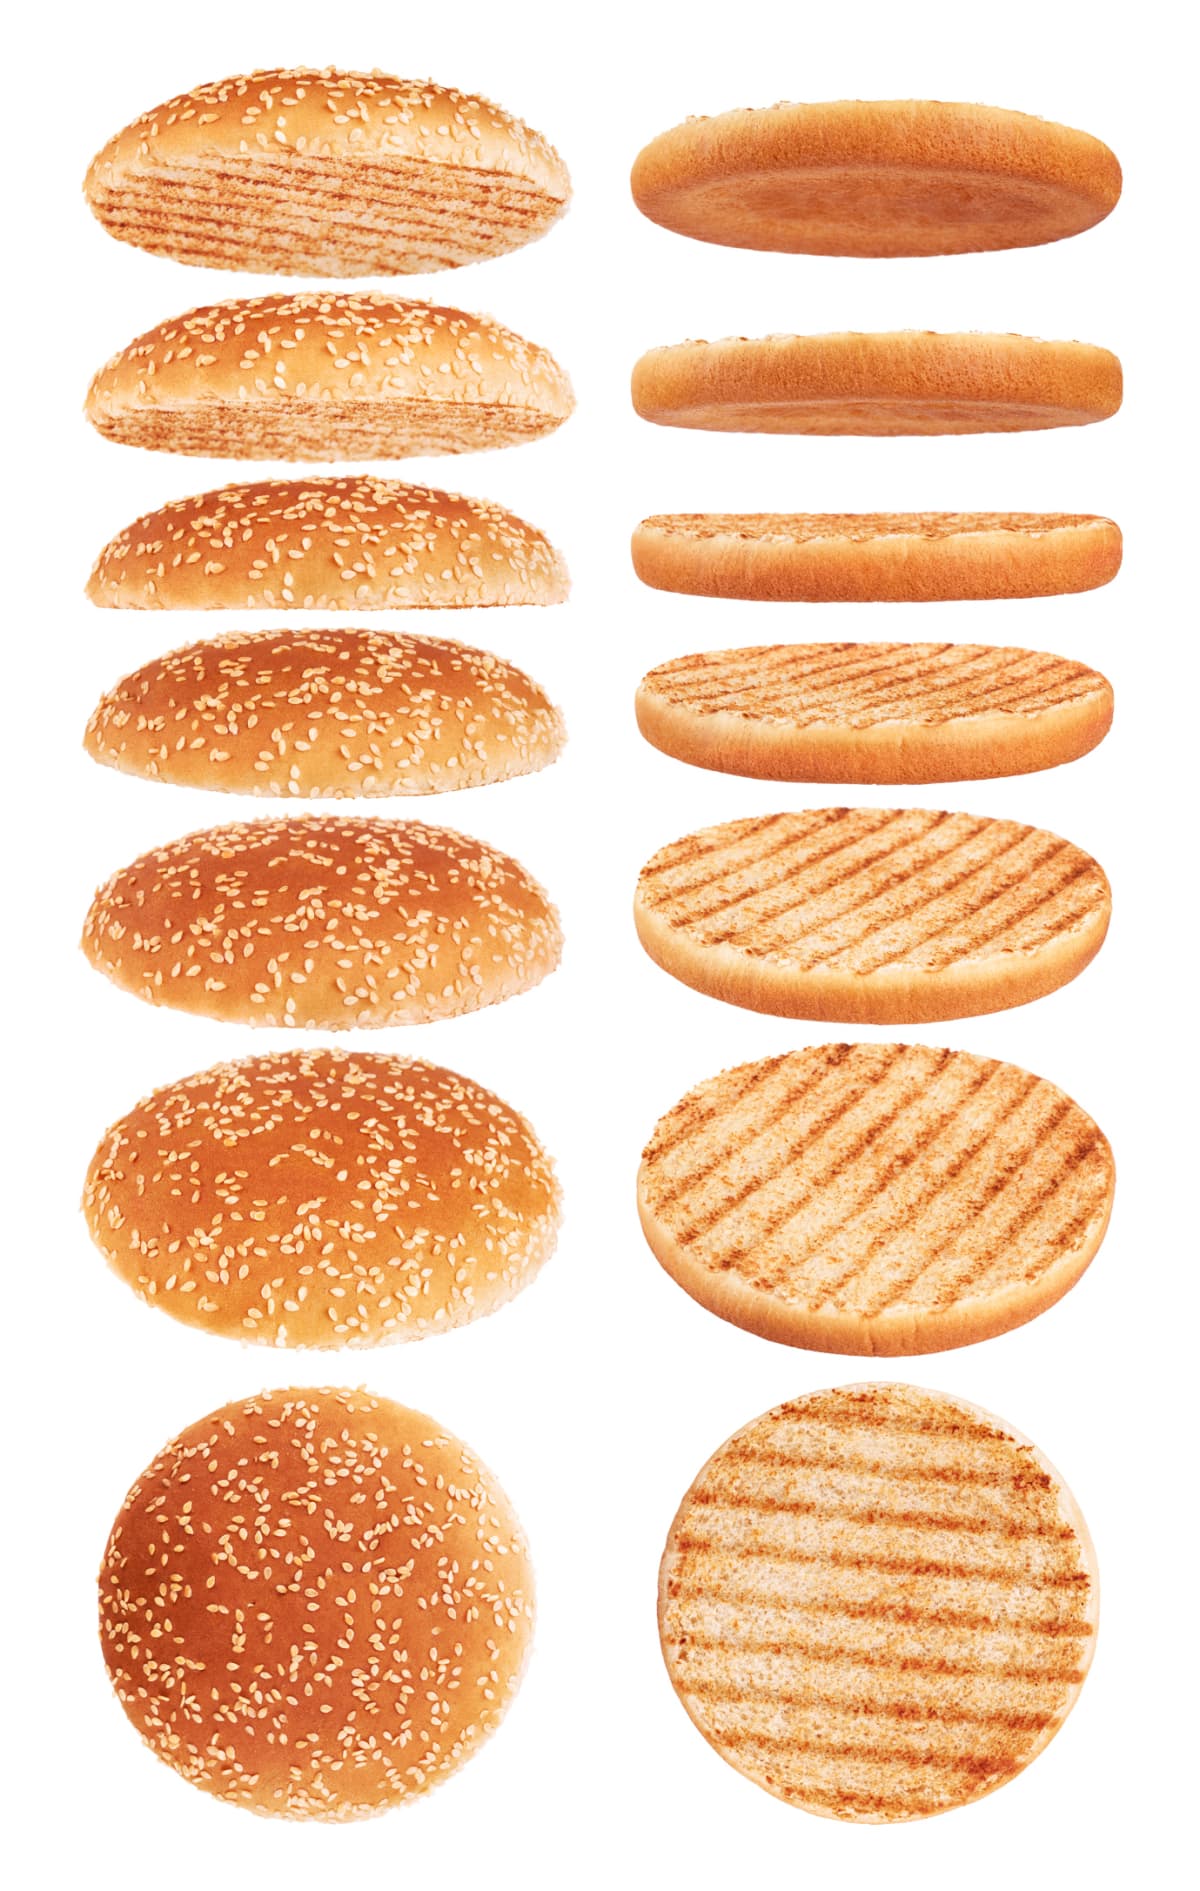 Grilled burger buns isolated on white background. Collection.